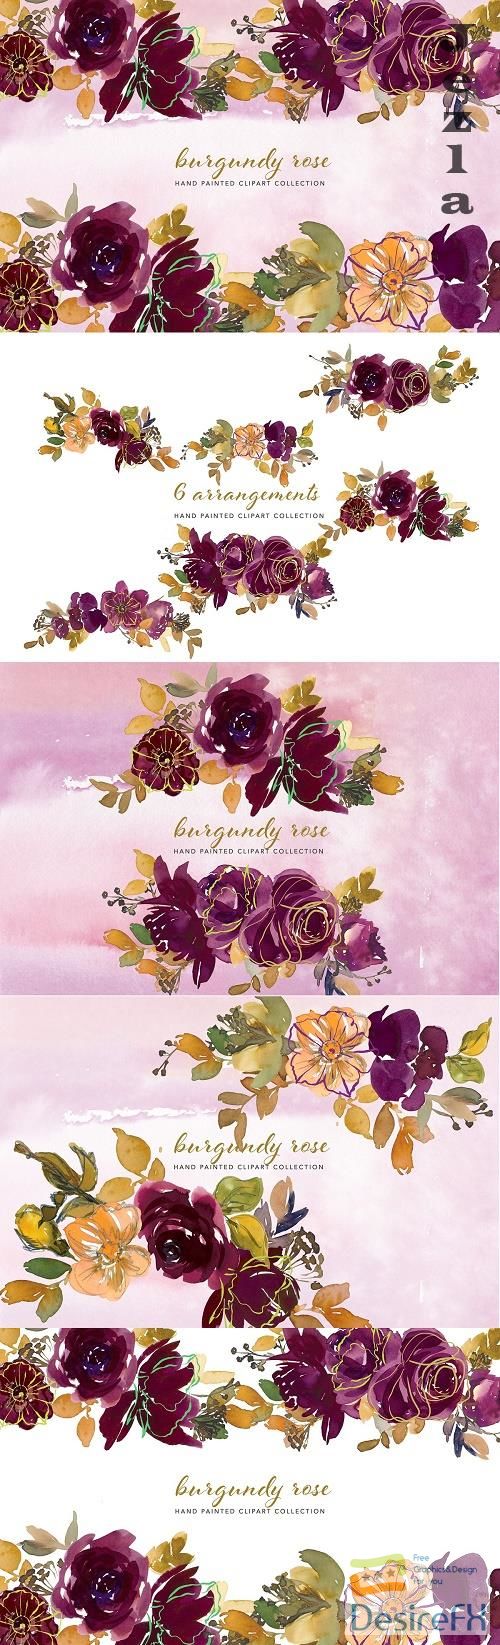 Watercolor Burgundy Floral Clipart - 5136891